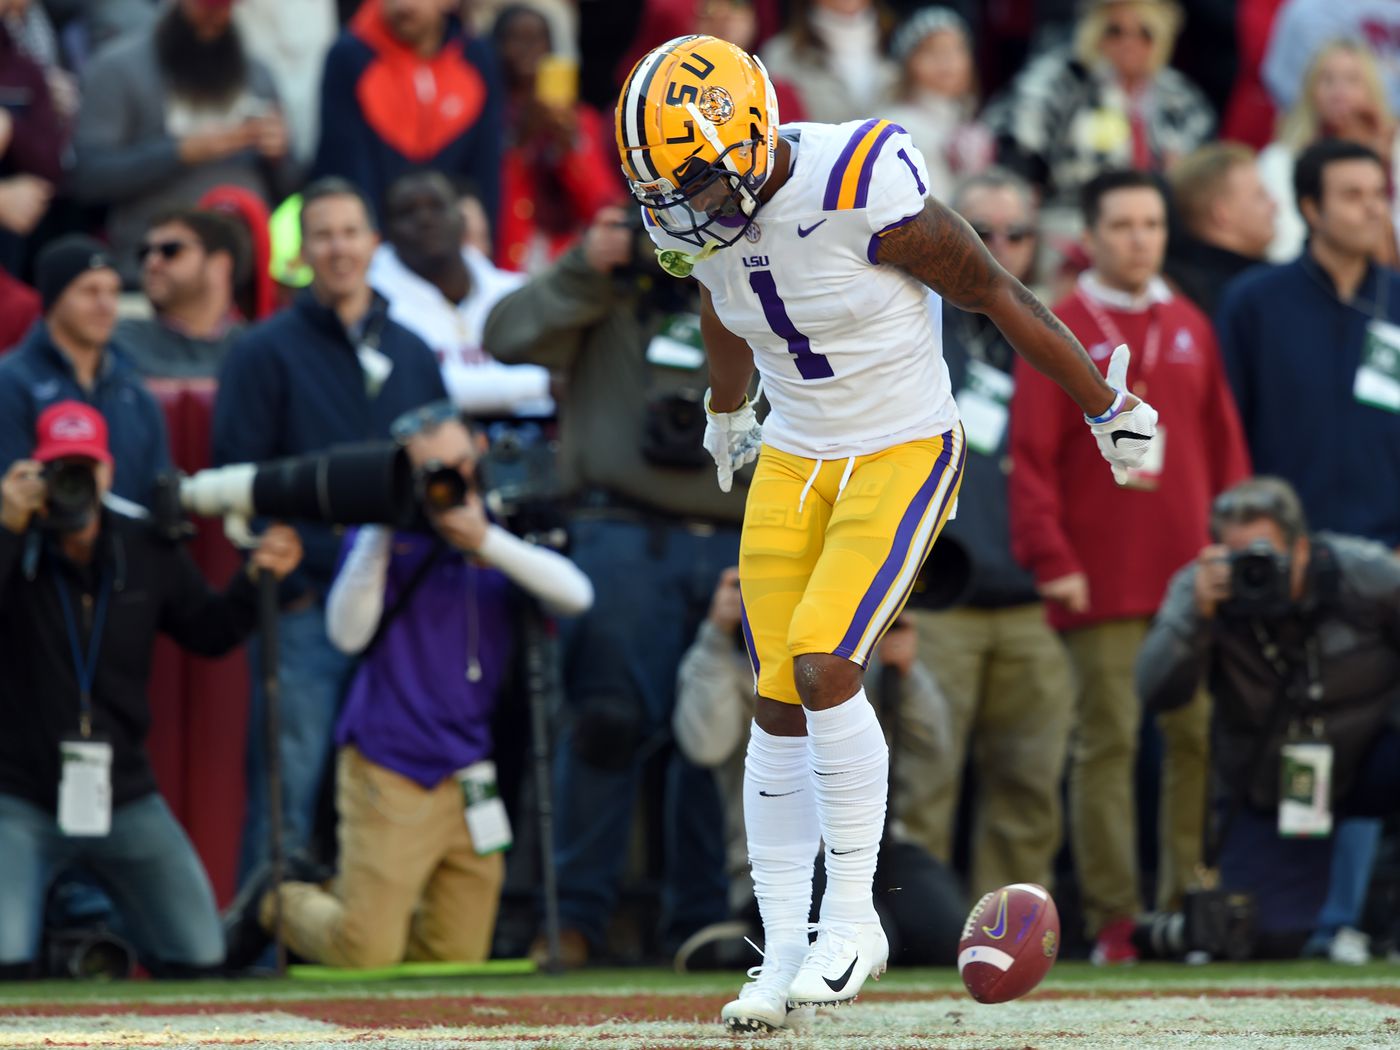 NFL Draft 2021: Ja'Marr Chase is the best LSU receiver prospect ever The Valley Shook